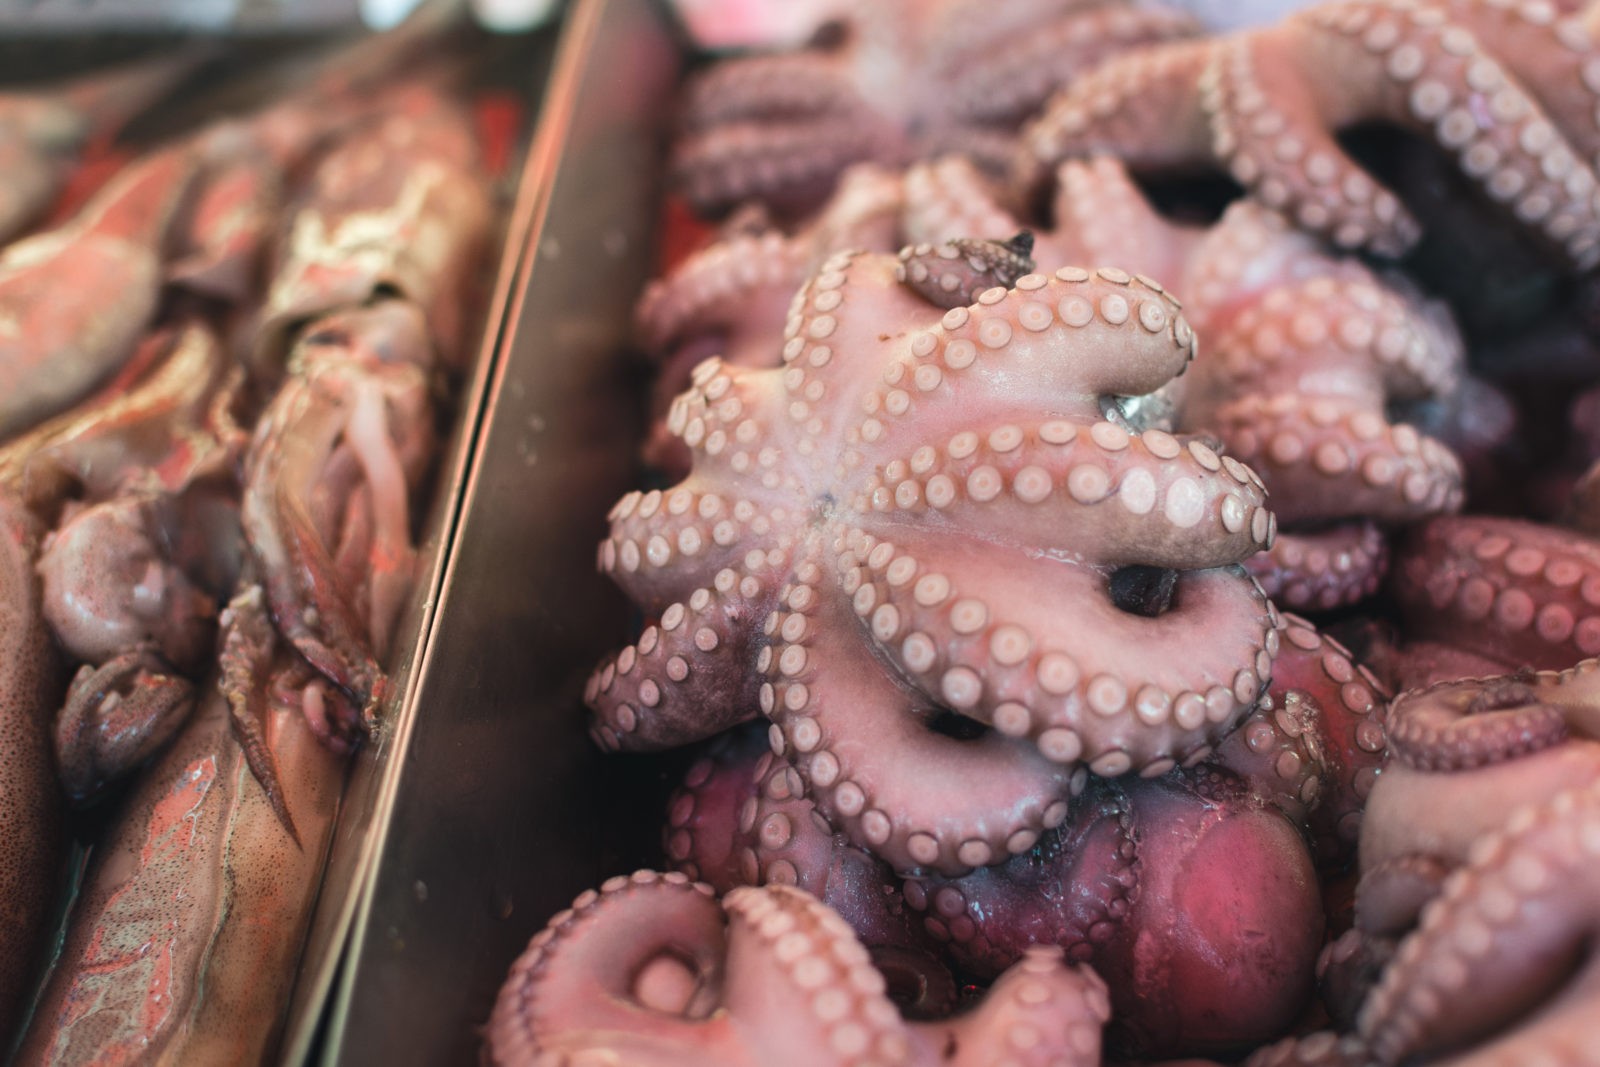 Octopus for sale at fish market